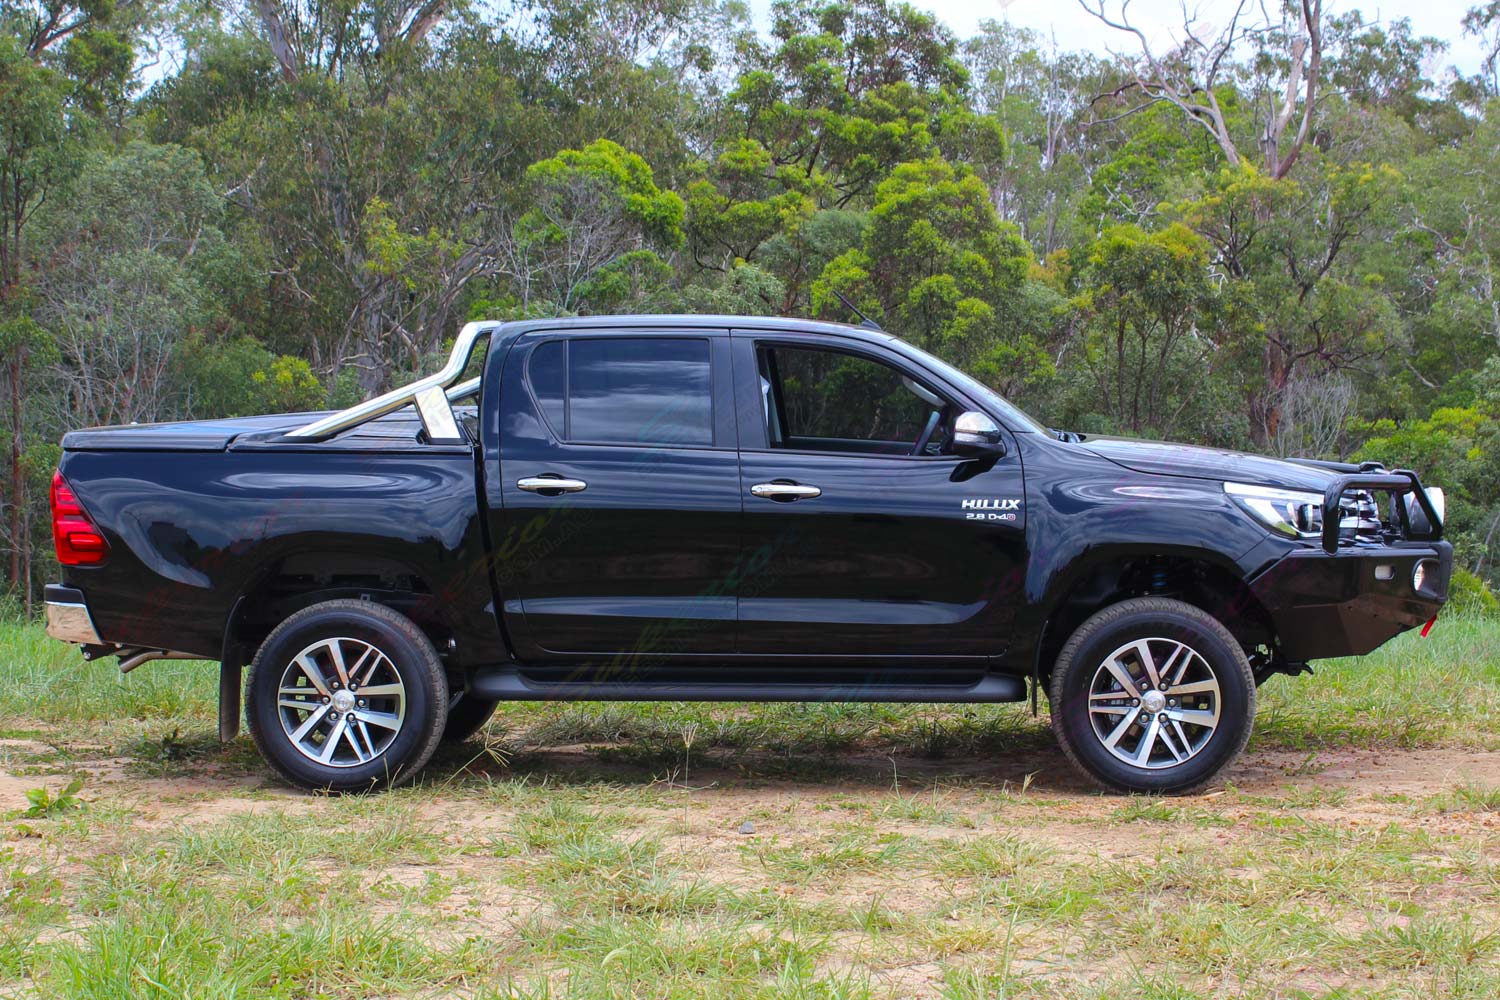 Right side view of a black Toyota Hilux Revo (Dual Cab) fitted with a premium Bilstein 2 inch lift kit